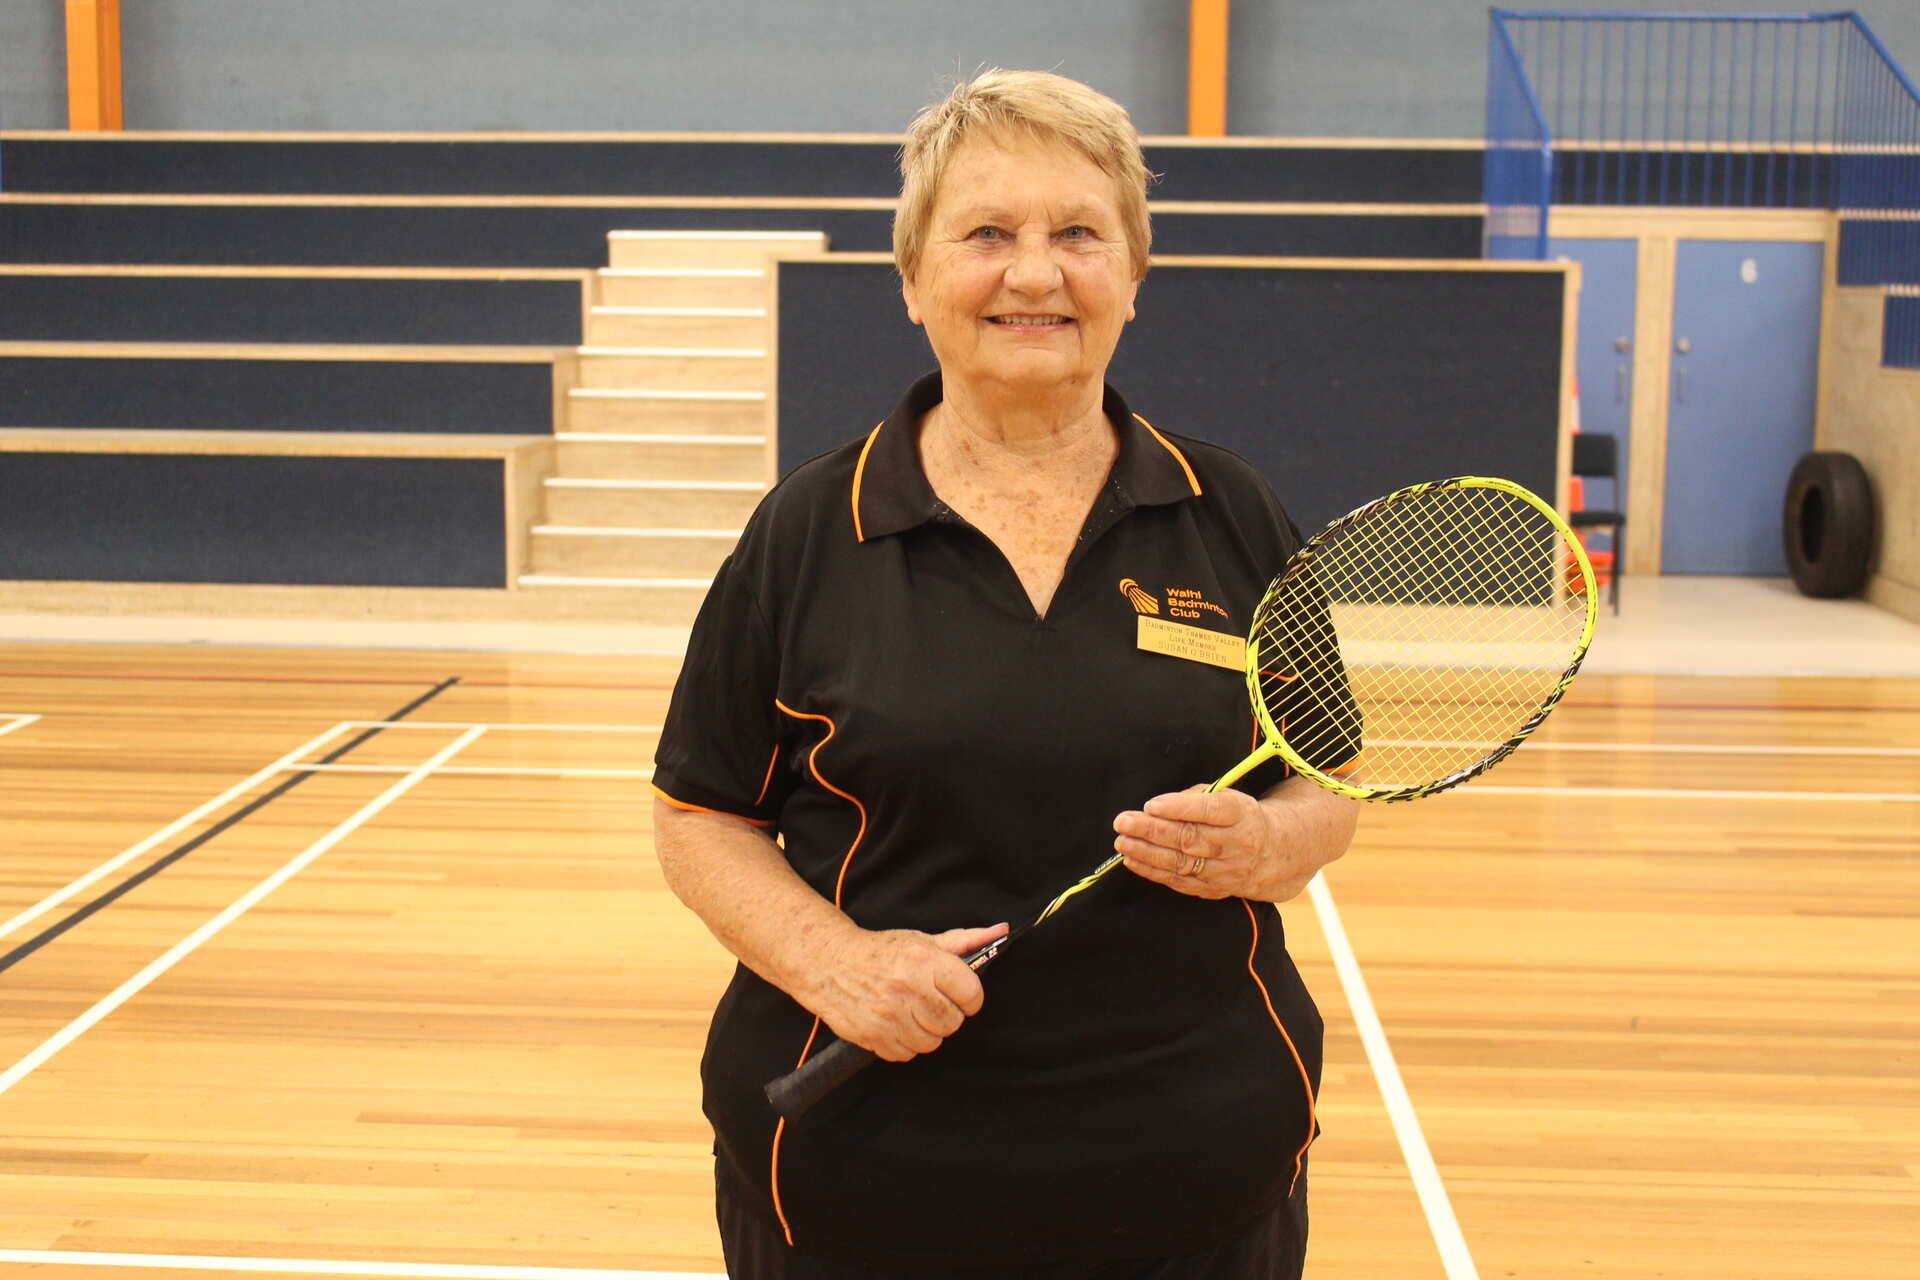 You are currently viewing Badminton life member honoured